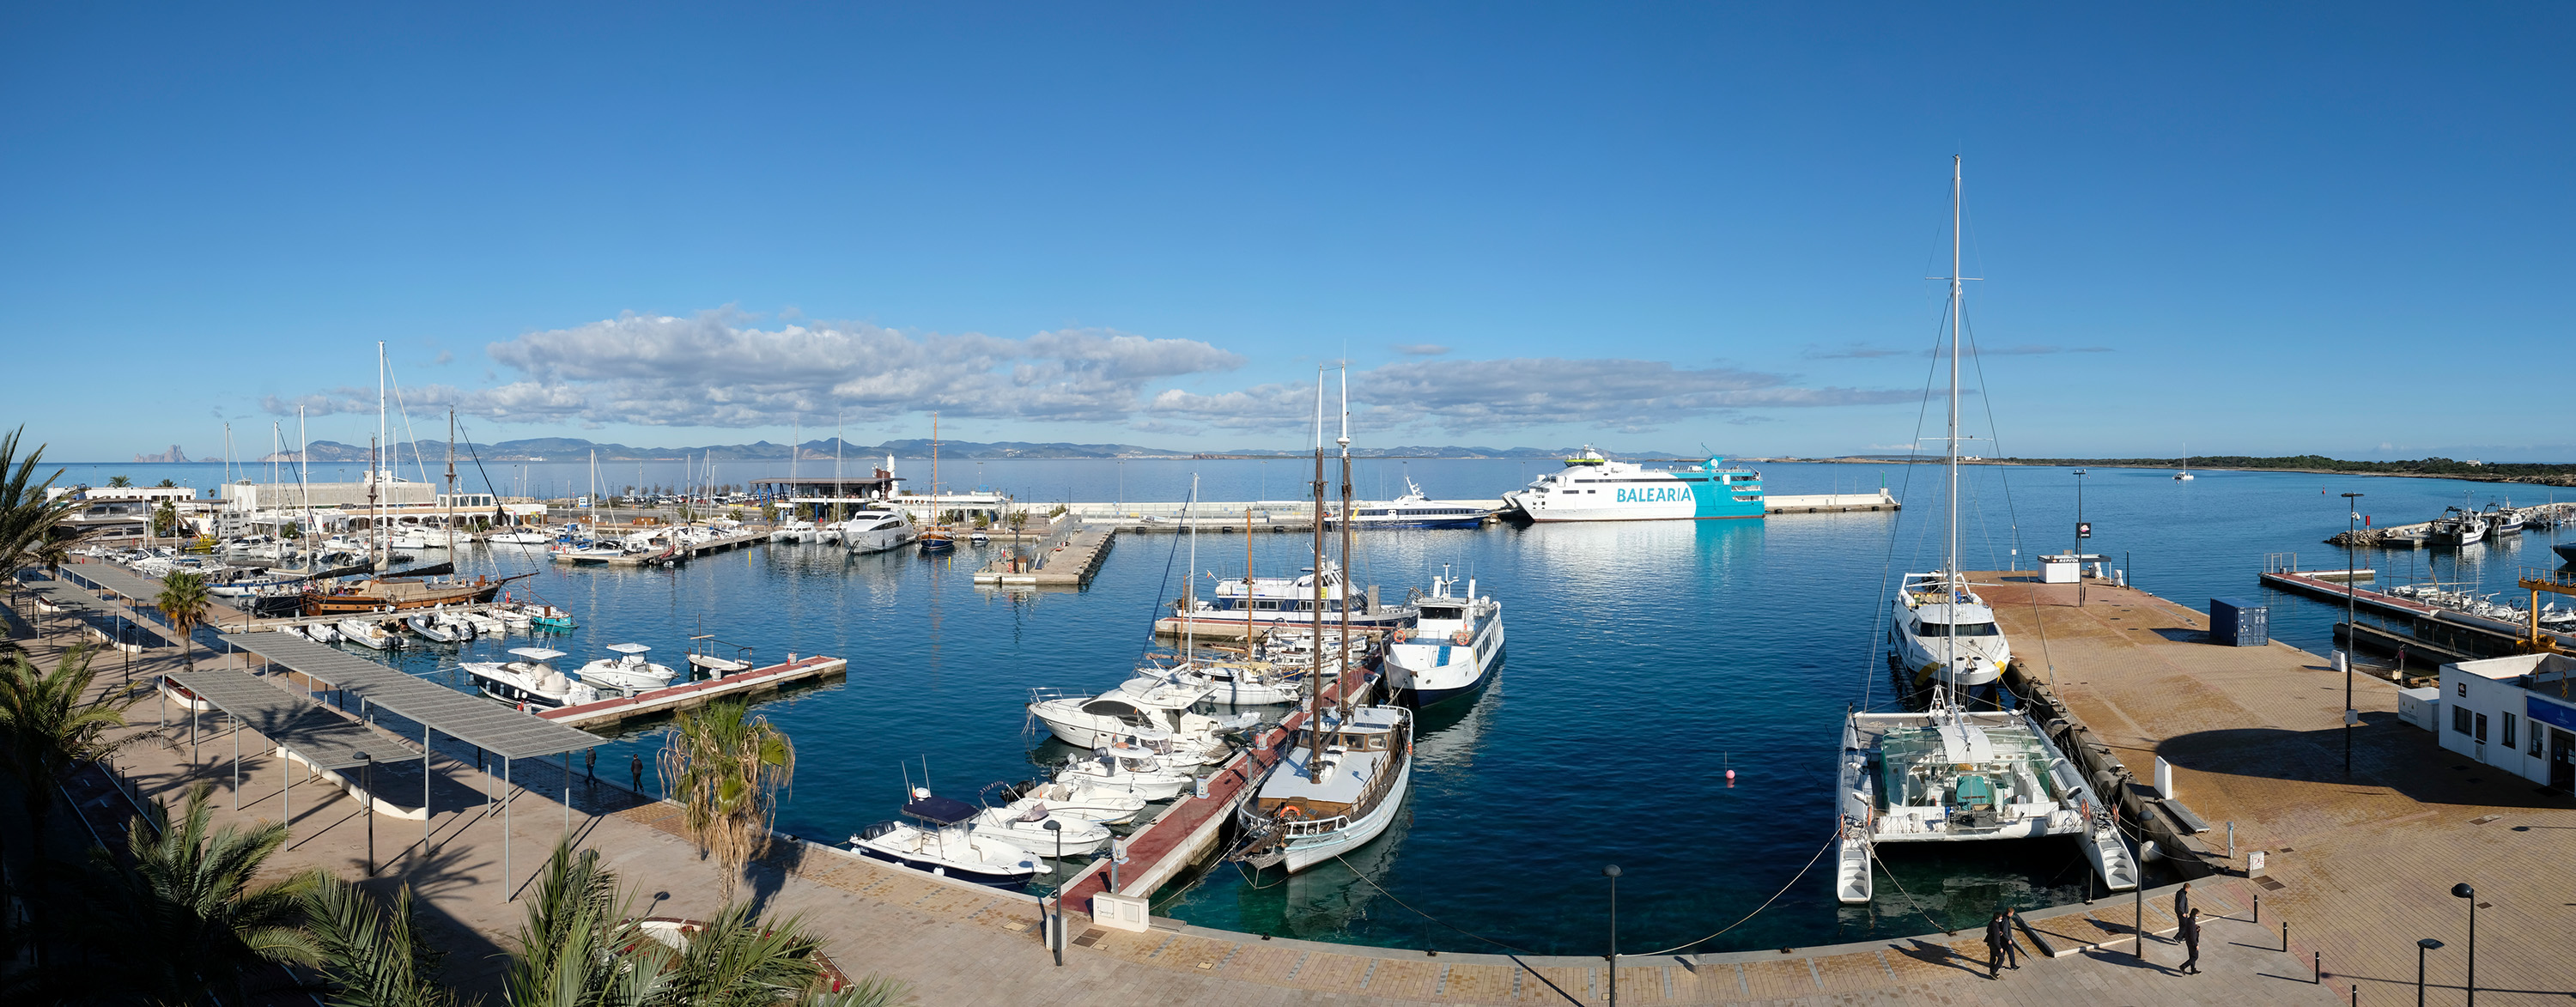 The management of moorings and premises in the Poniente dock of the port of La Savina, which includes rearrangement of space, is put out to tender